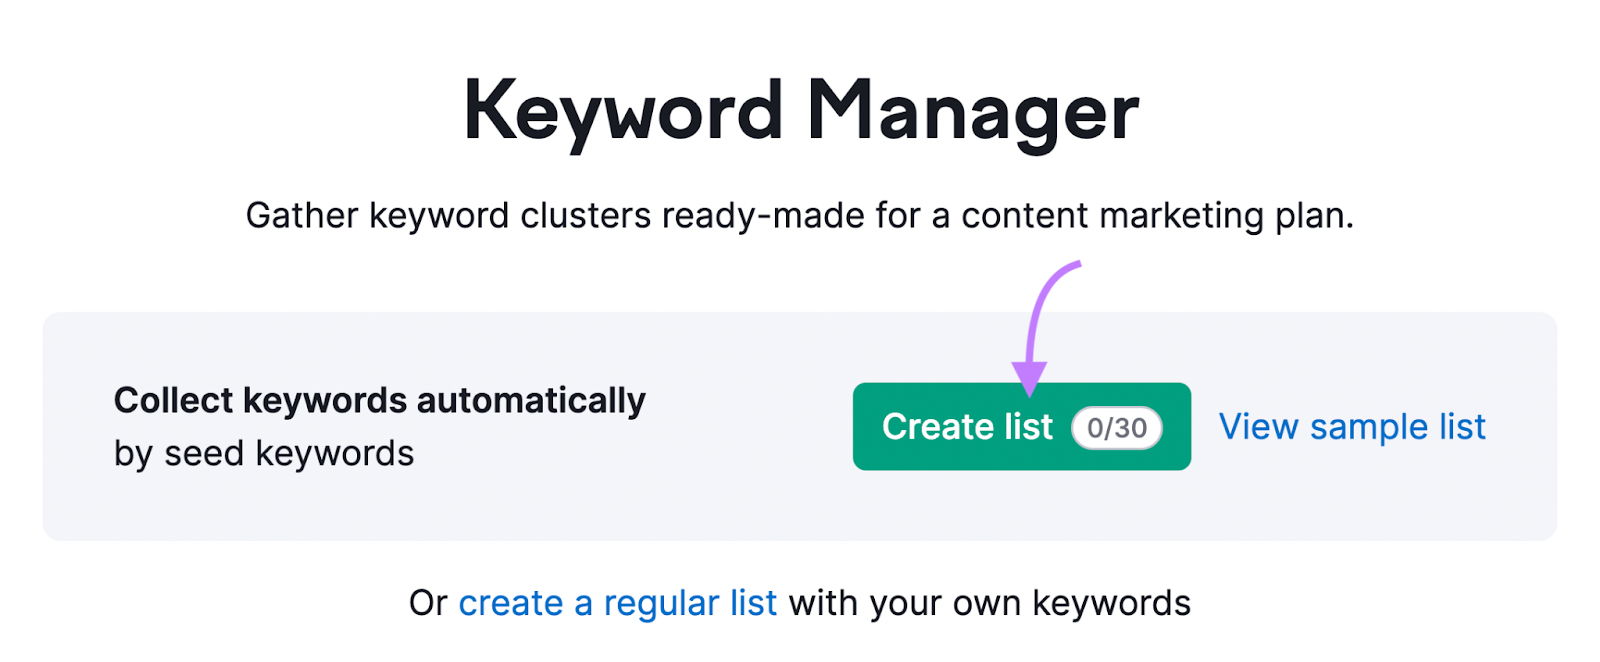 “Create list" button selected under Keyword Manager tool